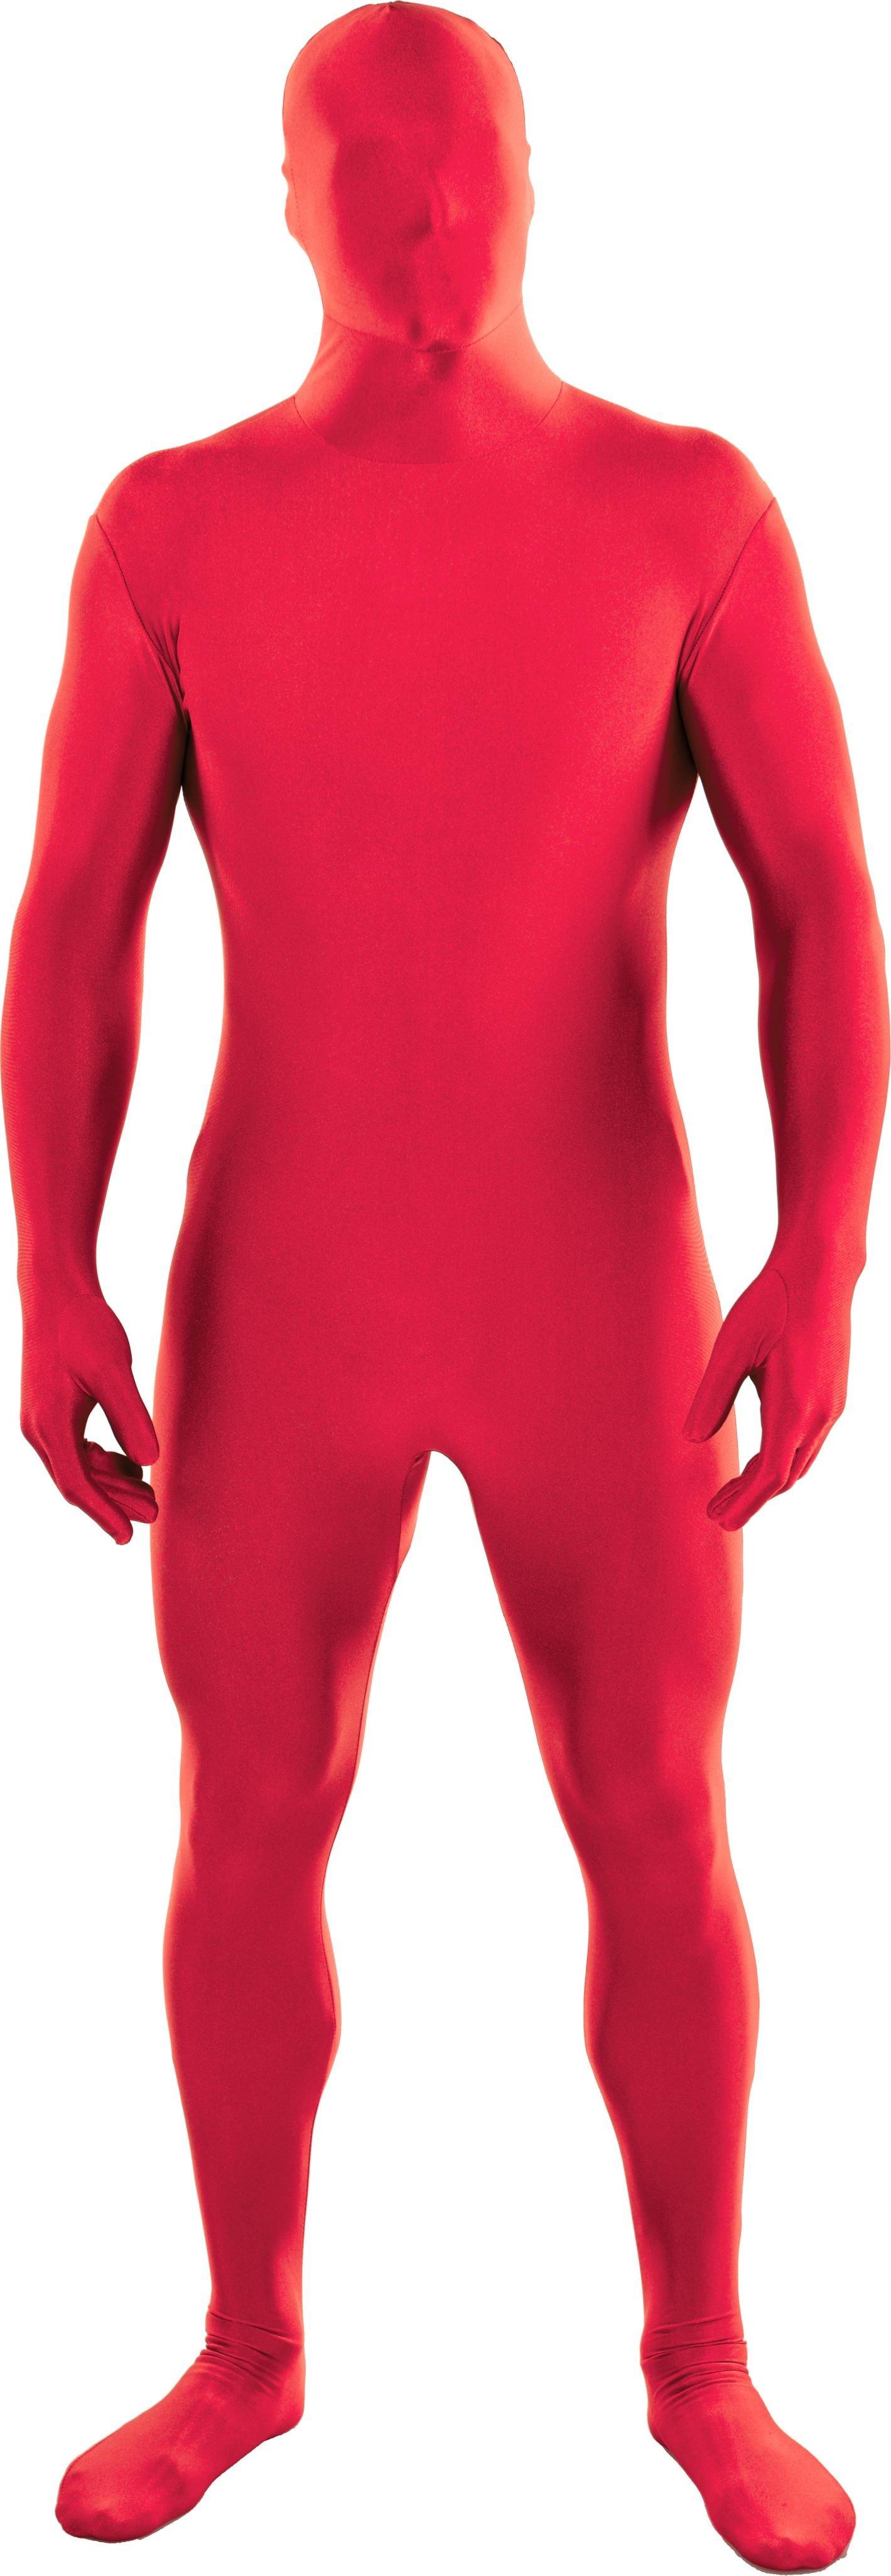 spandex suit pink, suits on all body shapes at